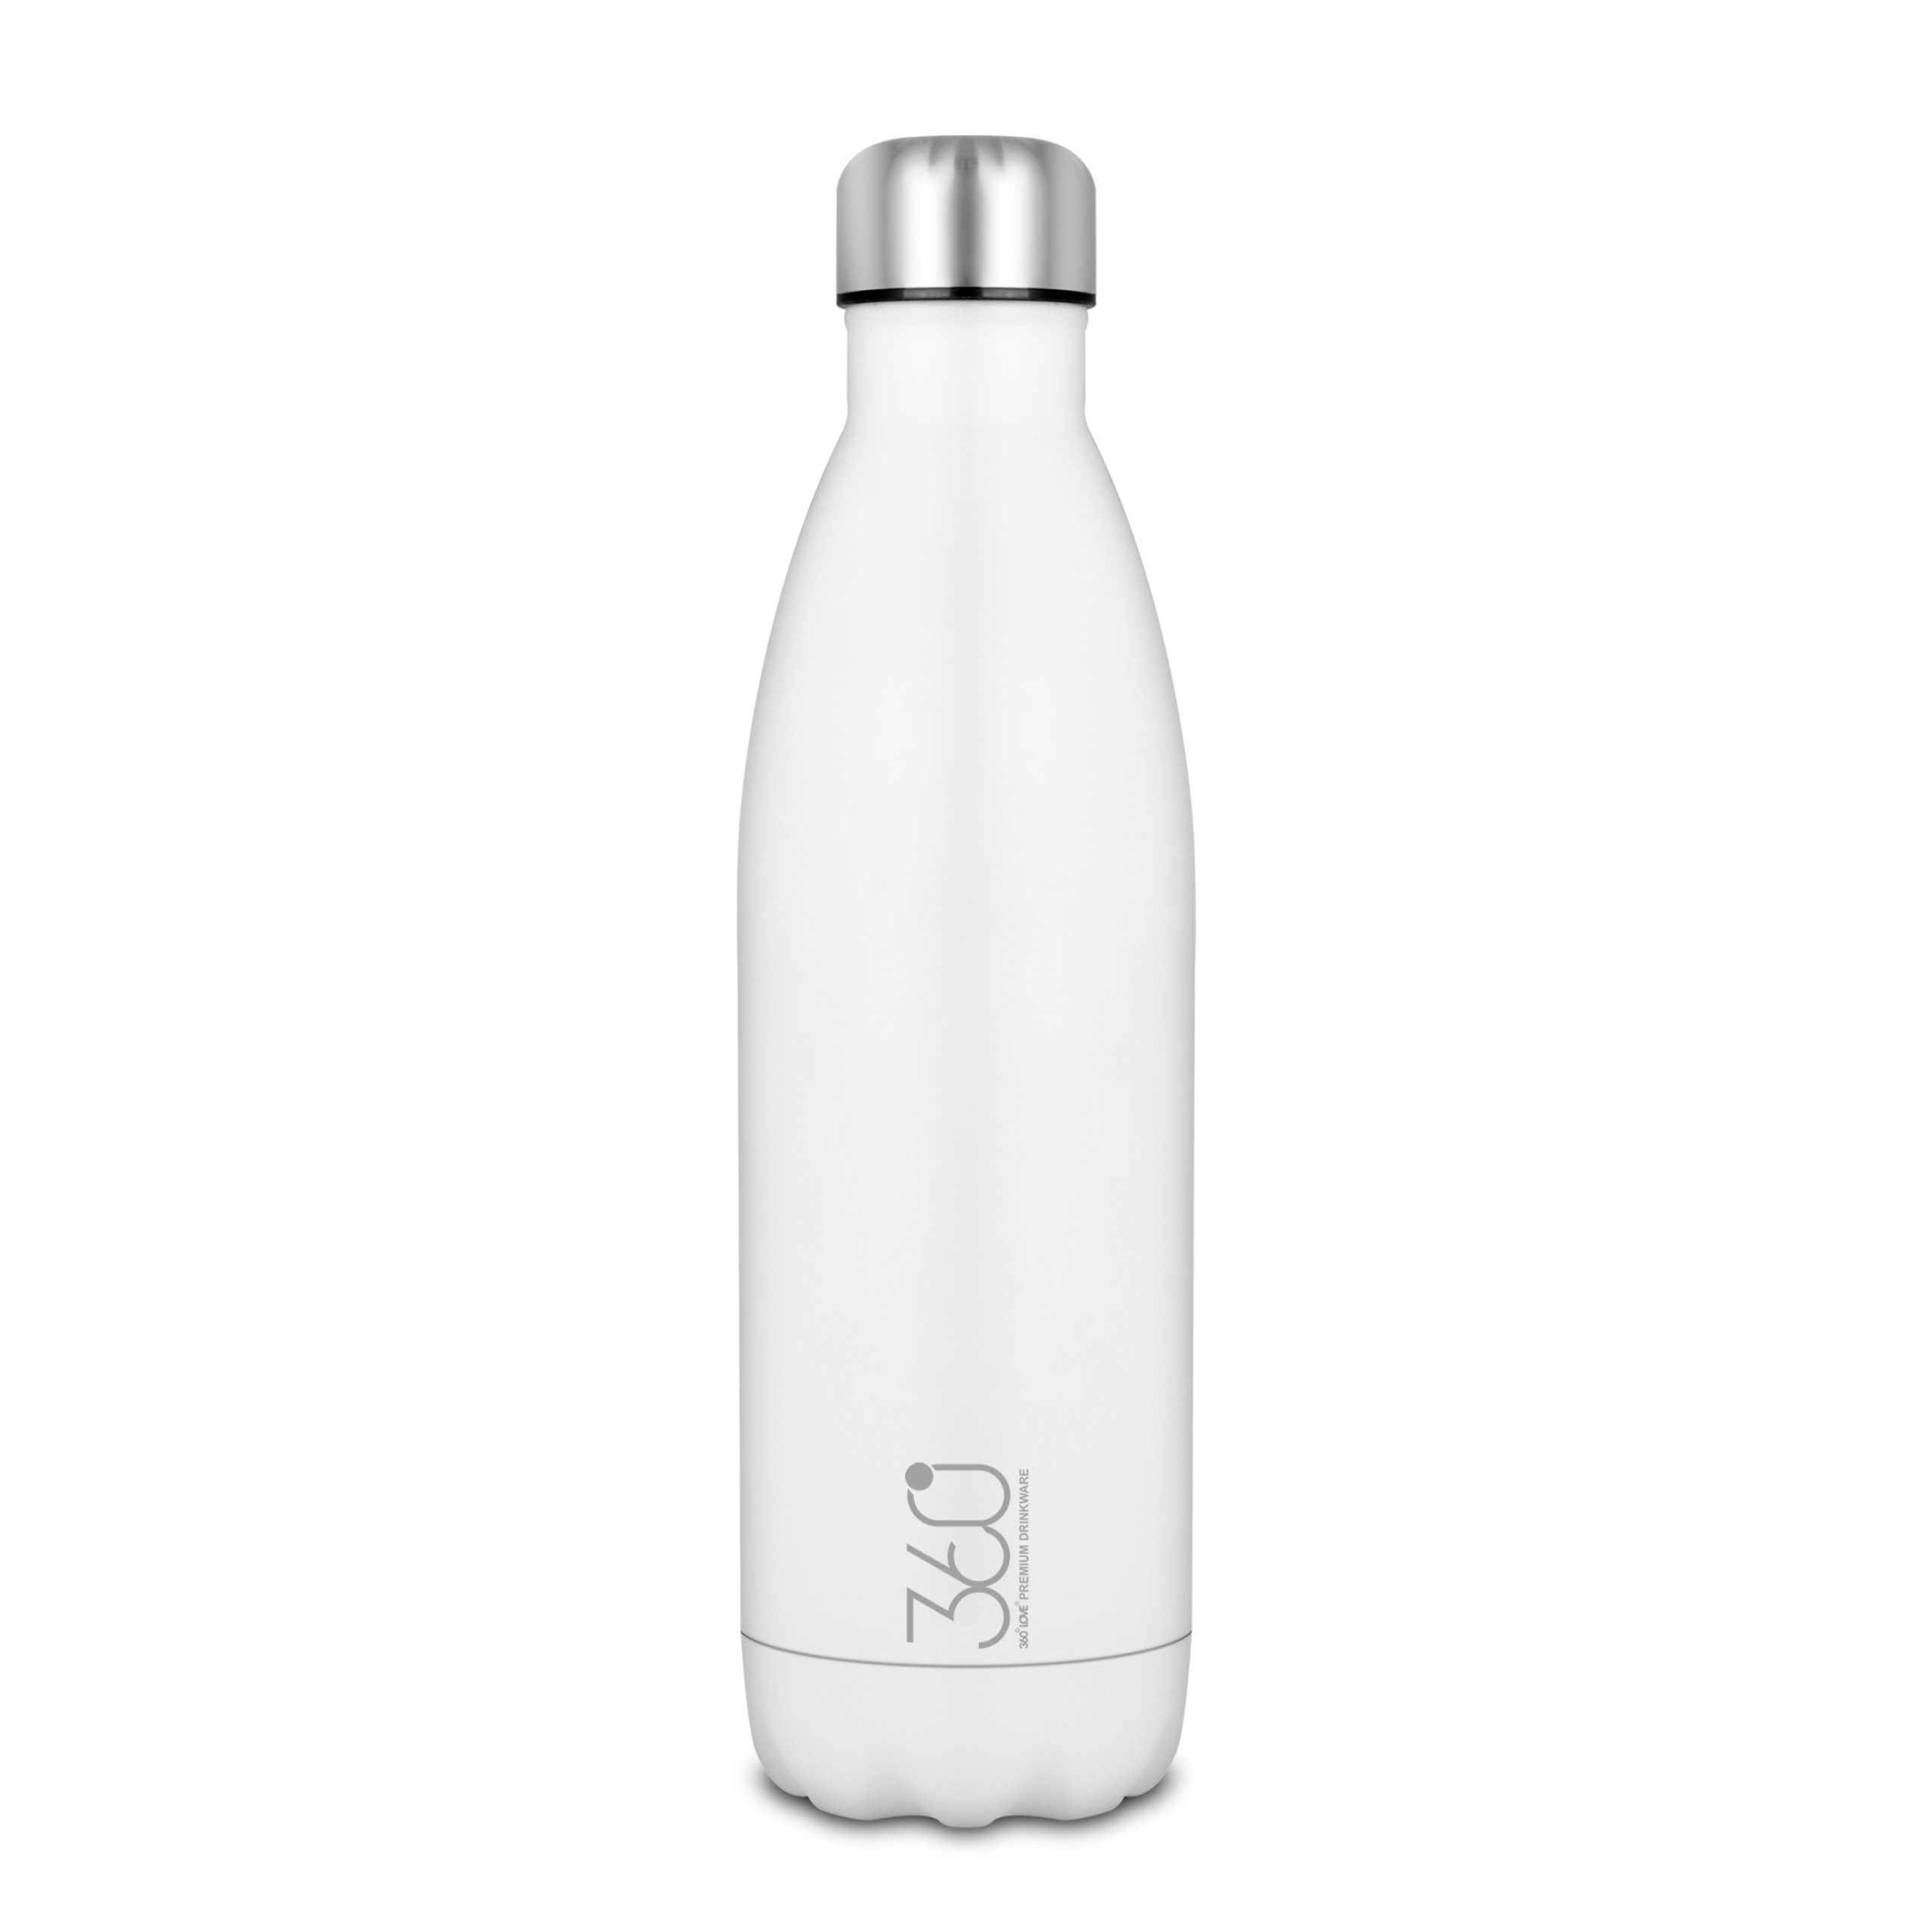 Hot & cold White Color Water Bottle